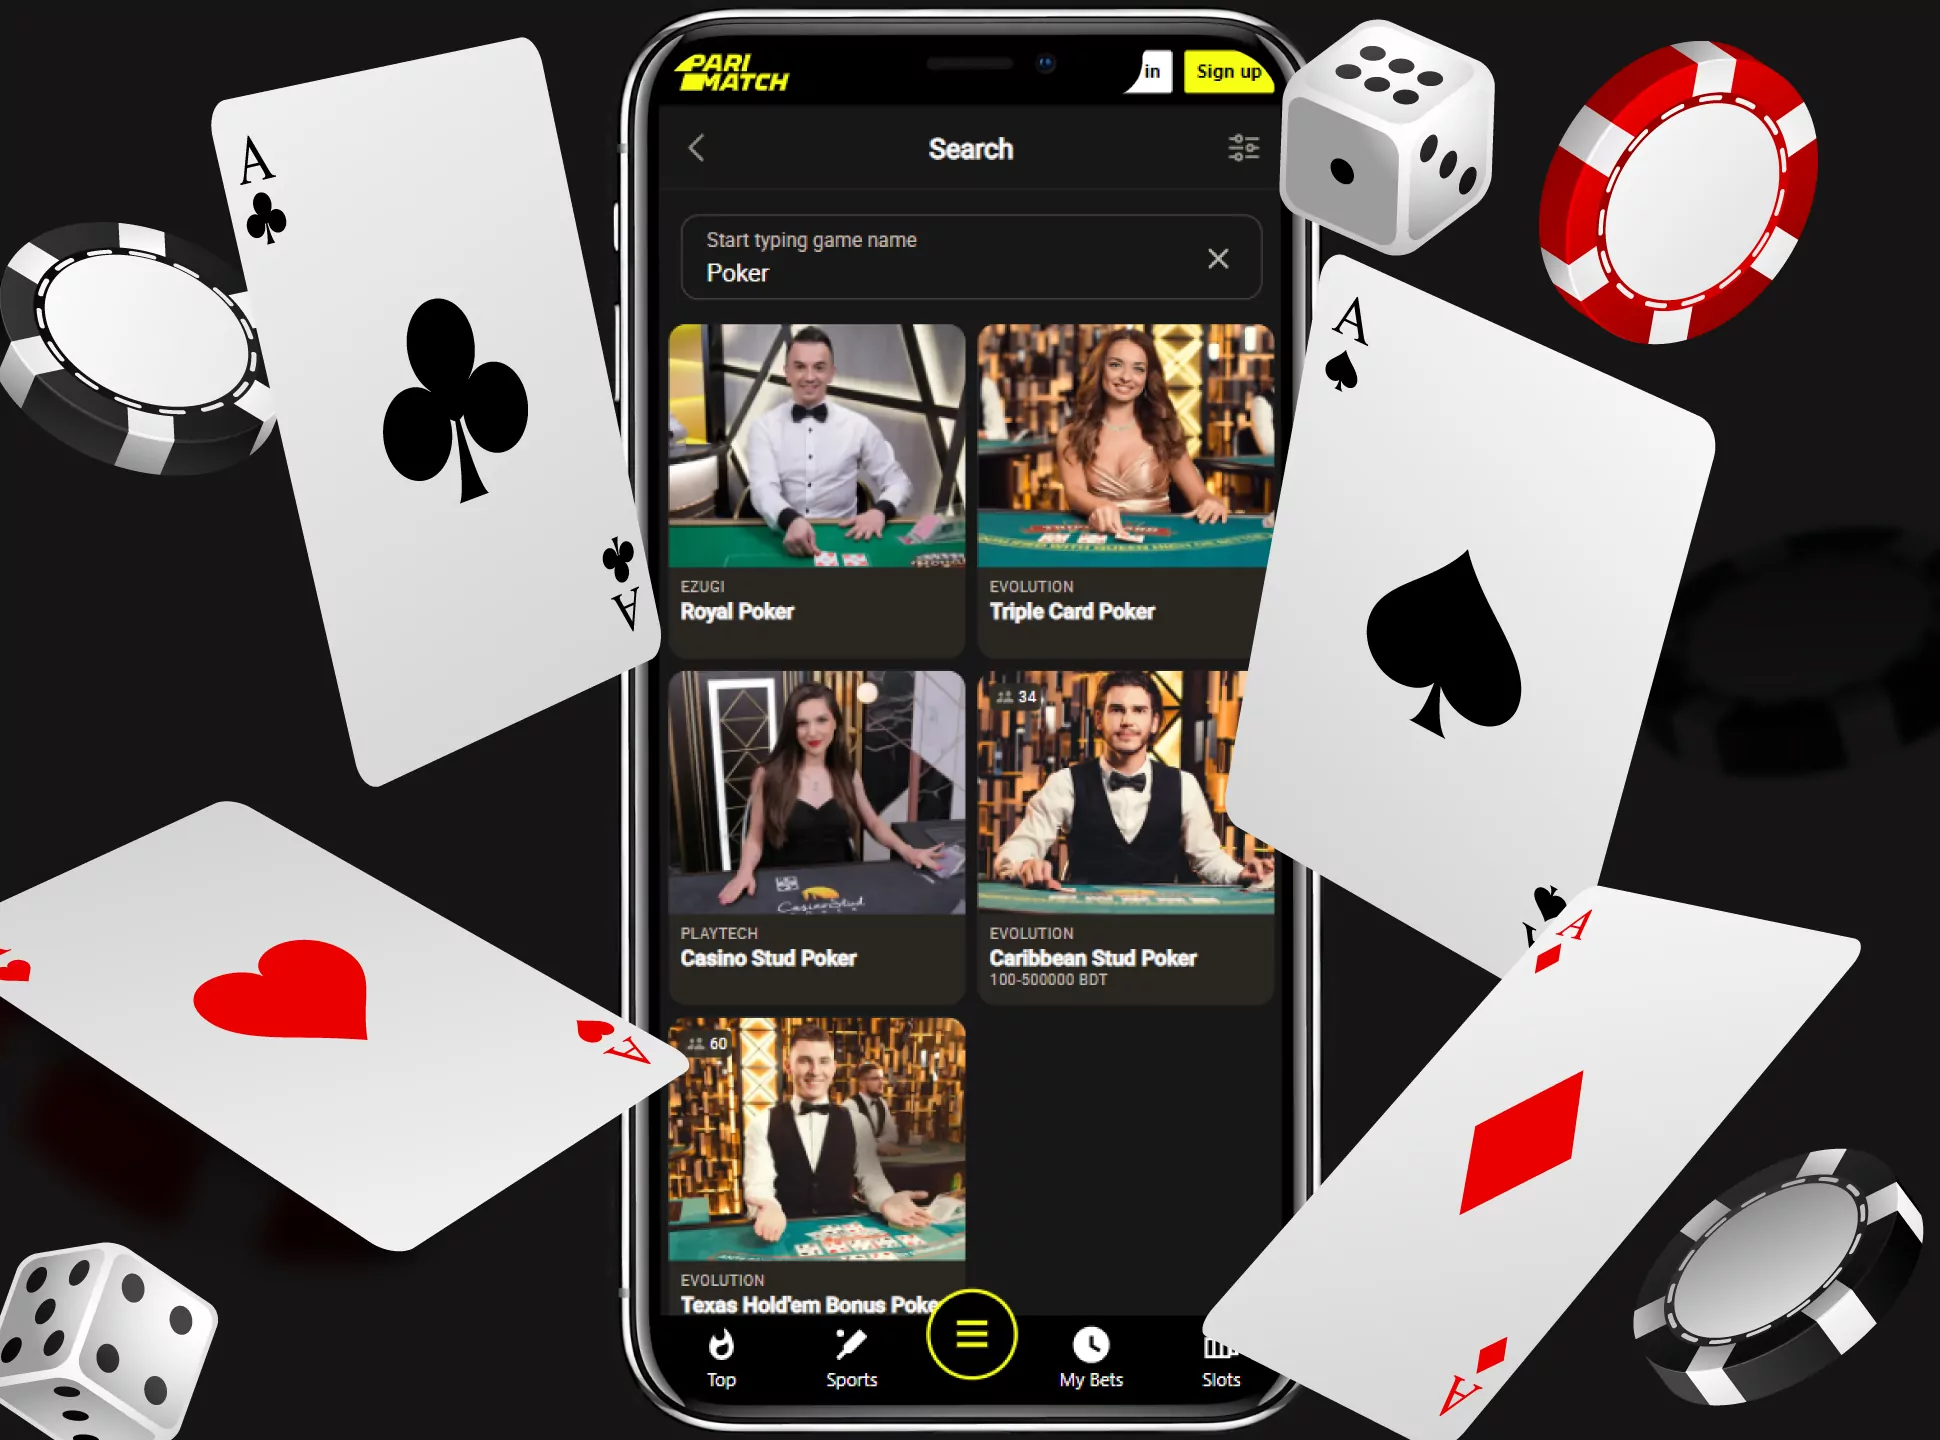 Find your favorite type of poker in the Parimatch app.